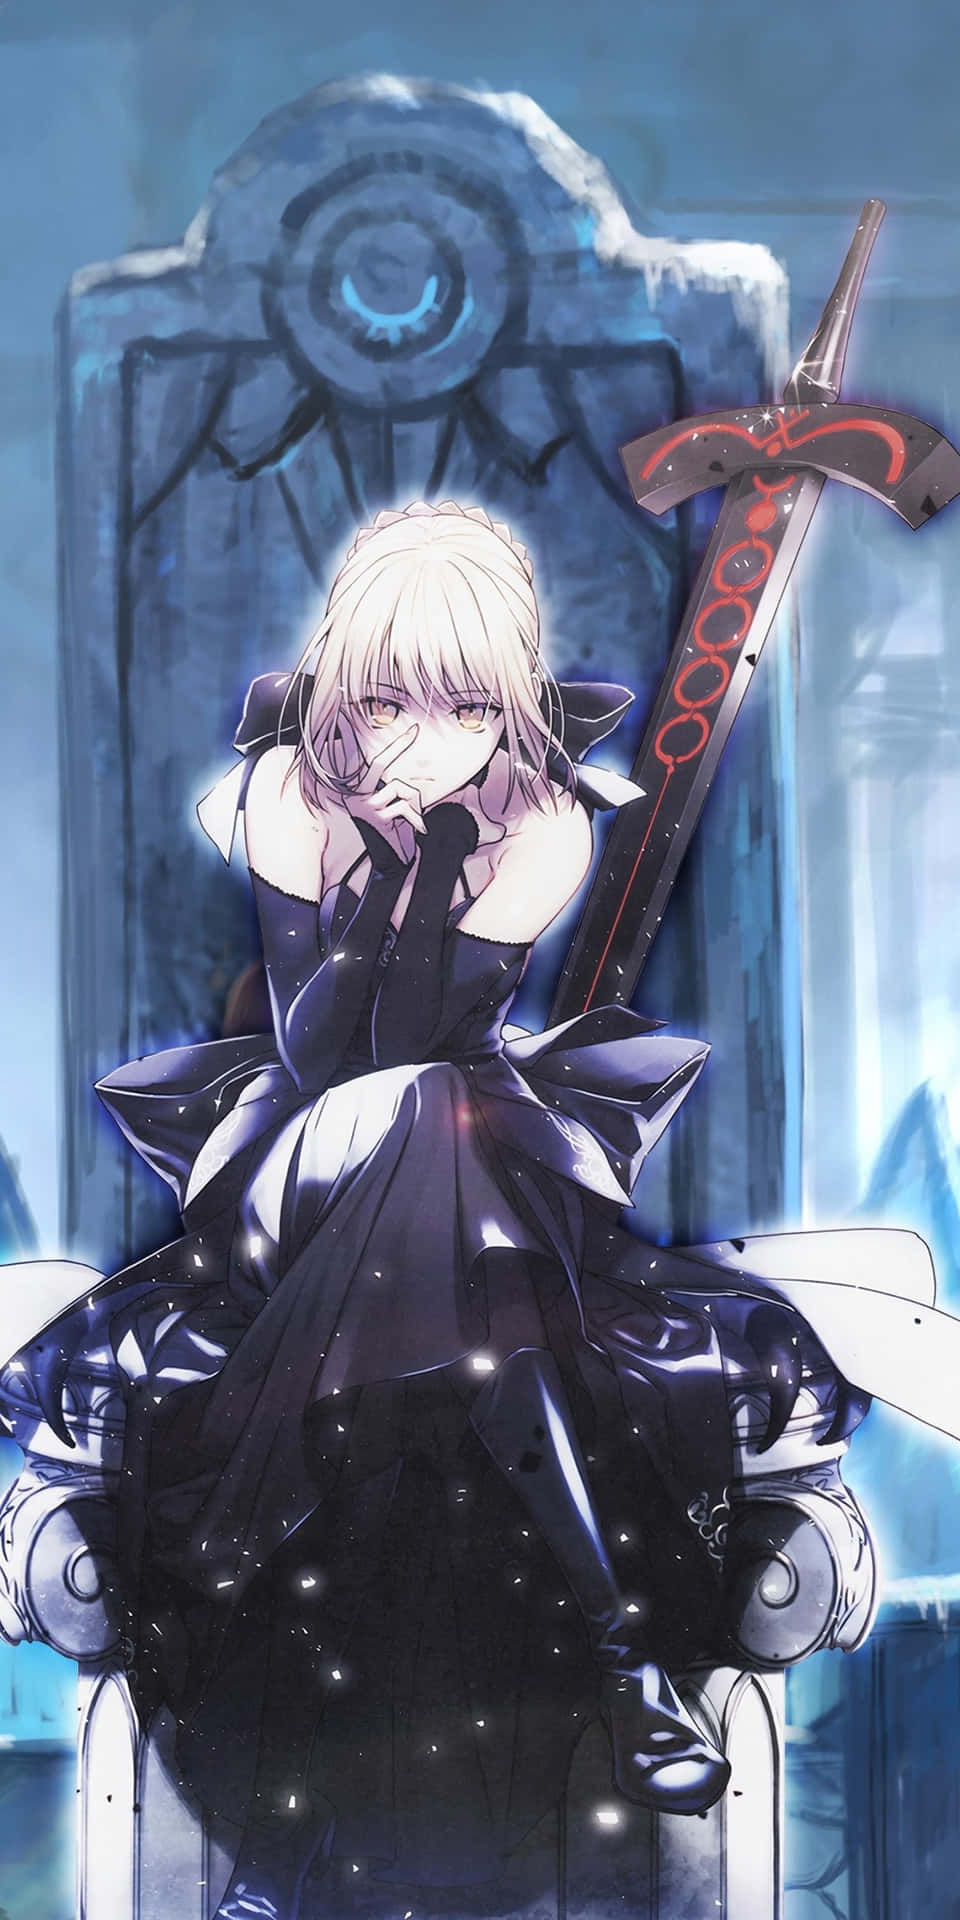 404383 anime anime girl Saber Alter Fate Series wallpaper download  2138x3000  Rare Gallery HD Wallpapers